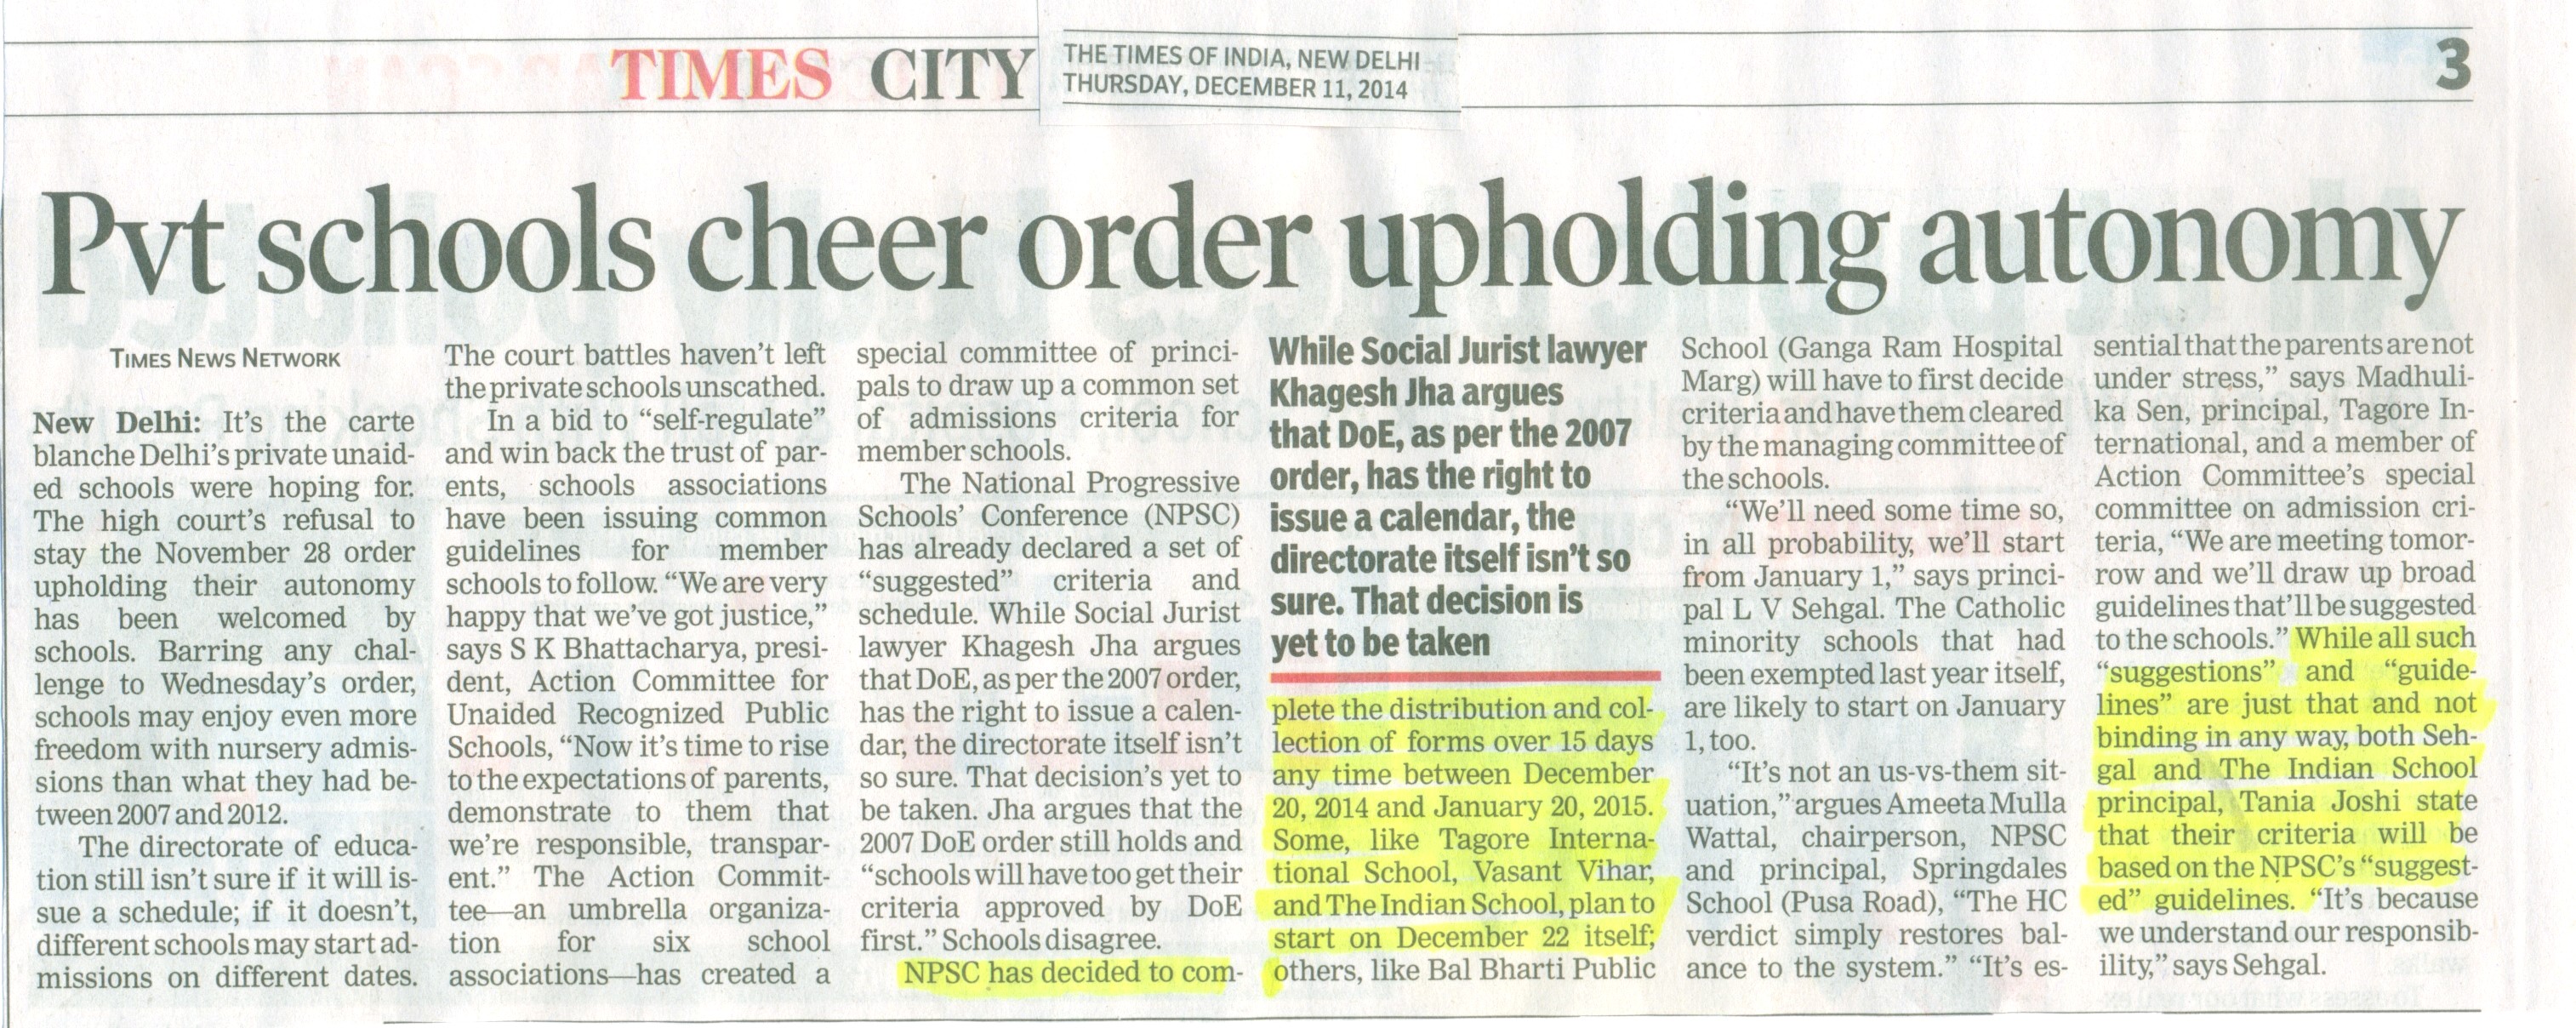 THE TIMES OF INDIA, THURSDAY, 11 DECEMBER,2014